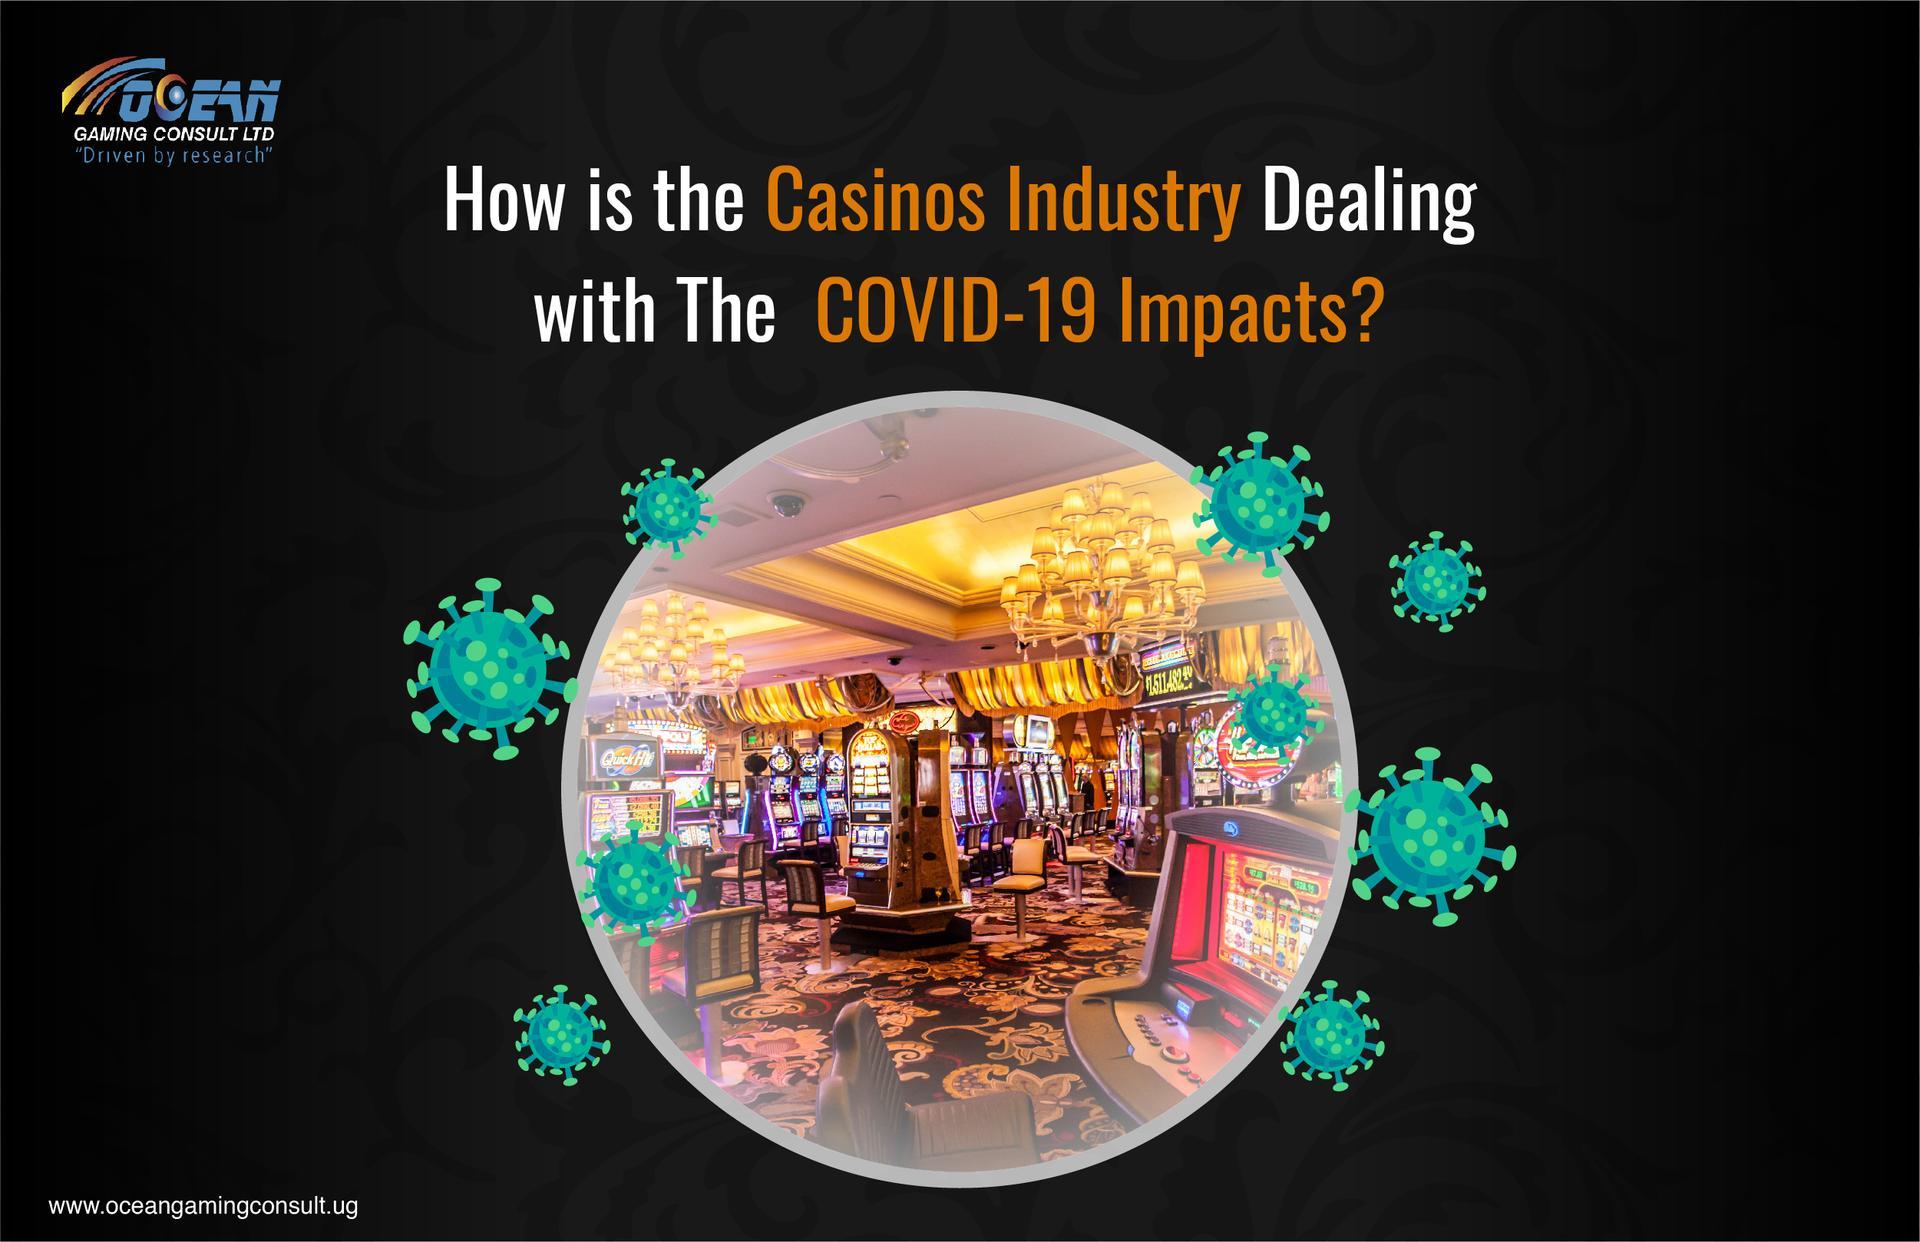 How Is the Casino Industry Dealing With The COVID-19 Impacts